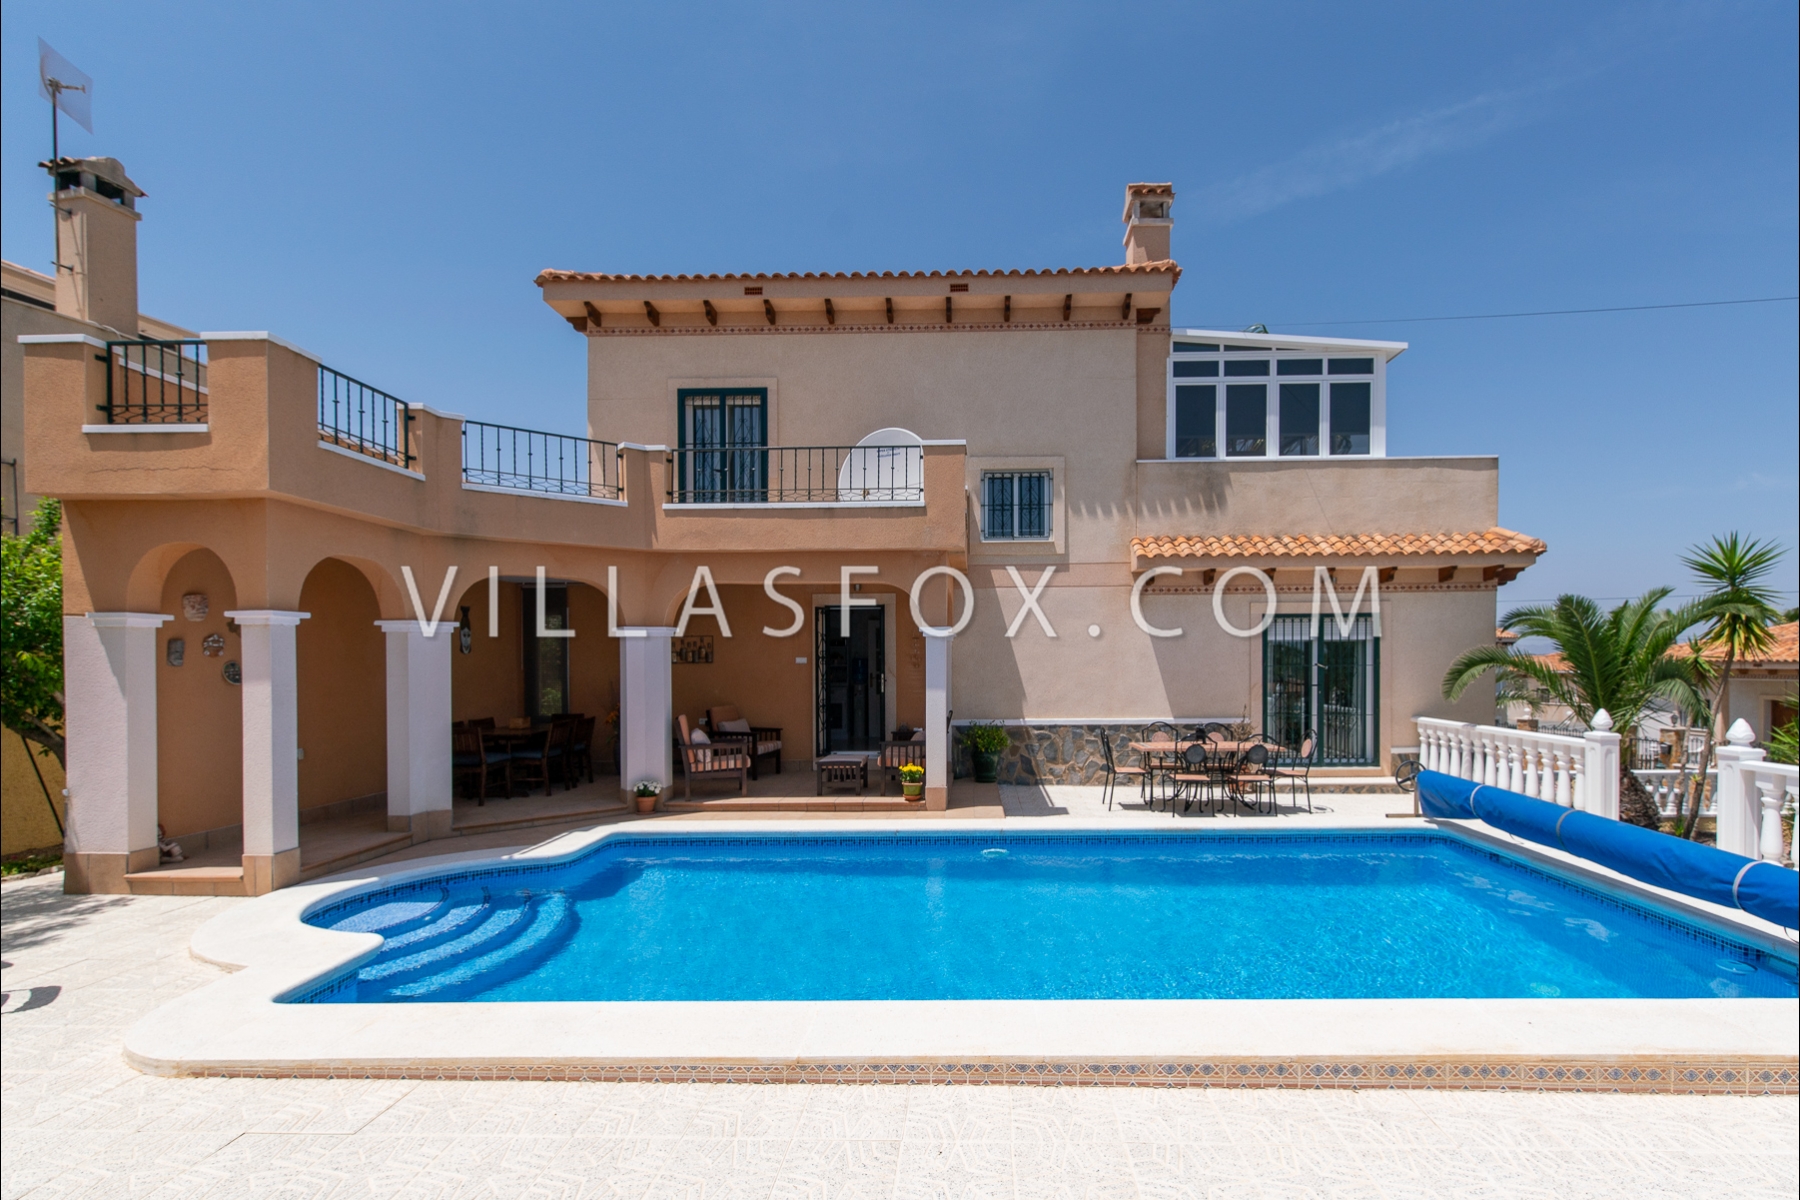 RESERVED!! Stunning 3-bedroom, 3-bathroom detached villa with pool, garage and incredible views!